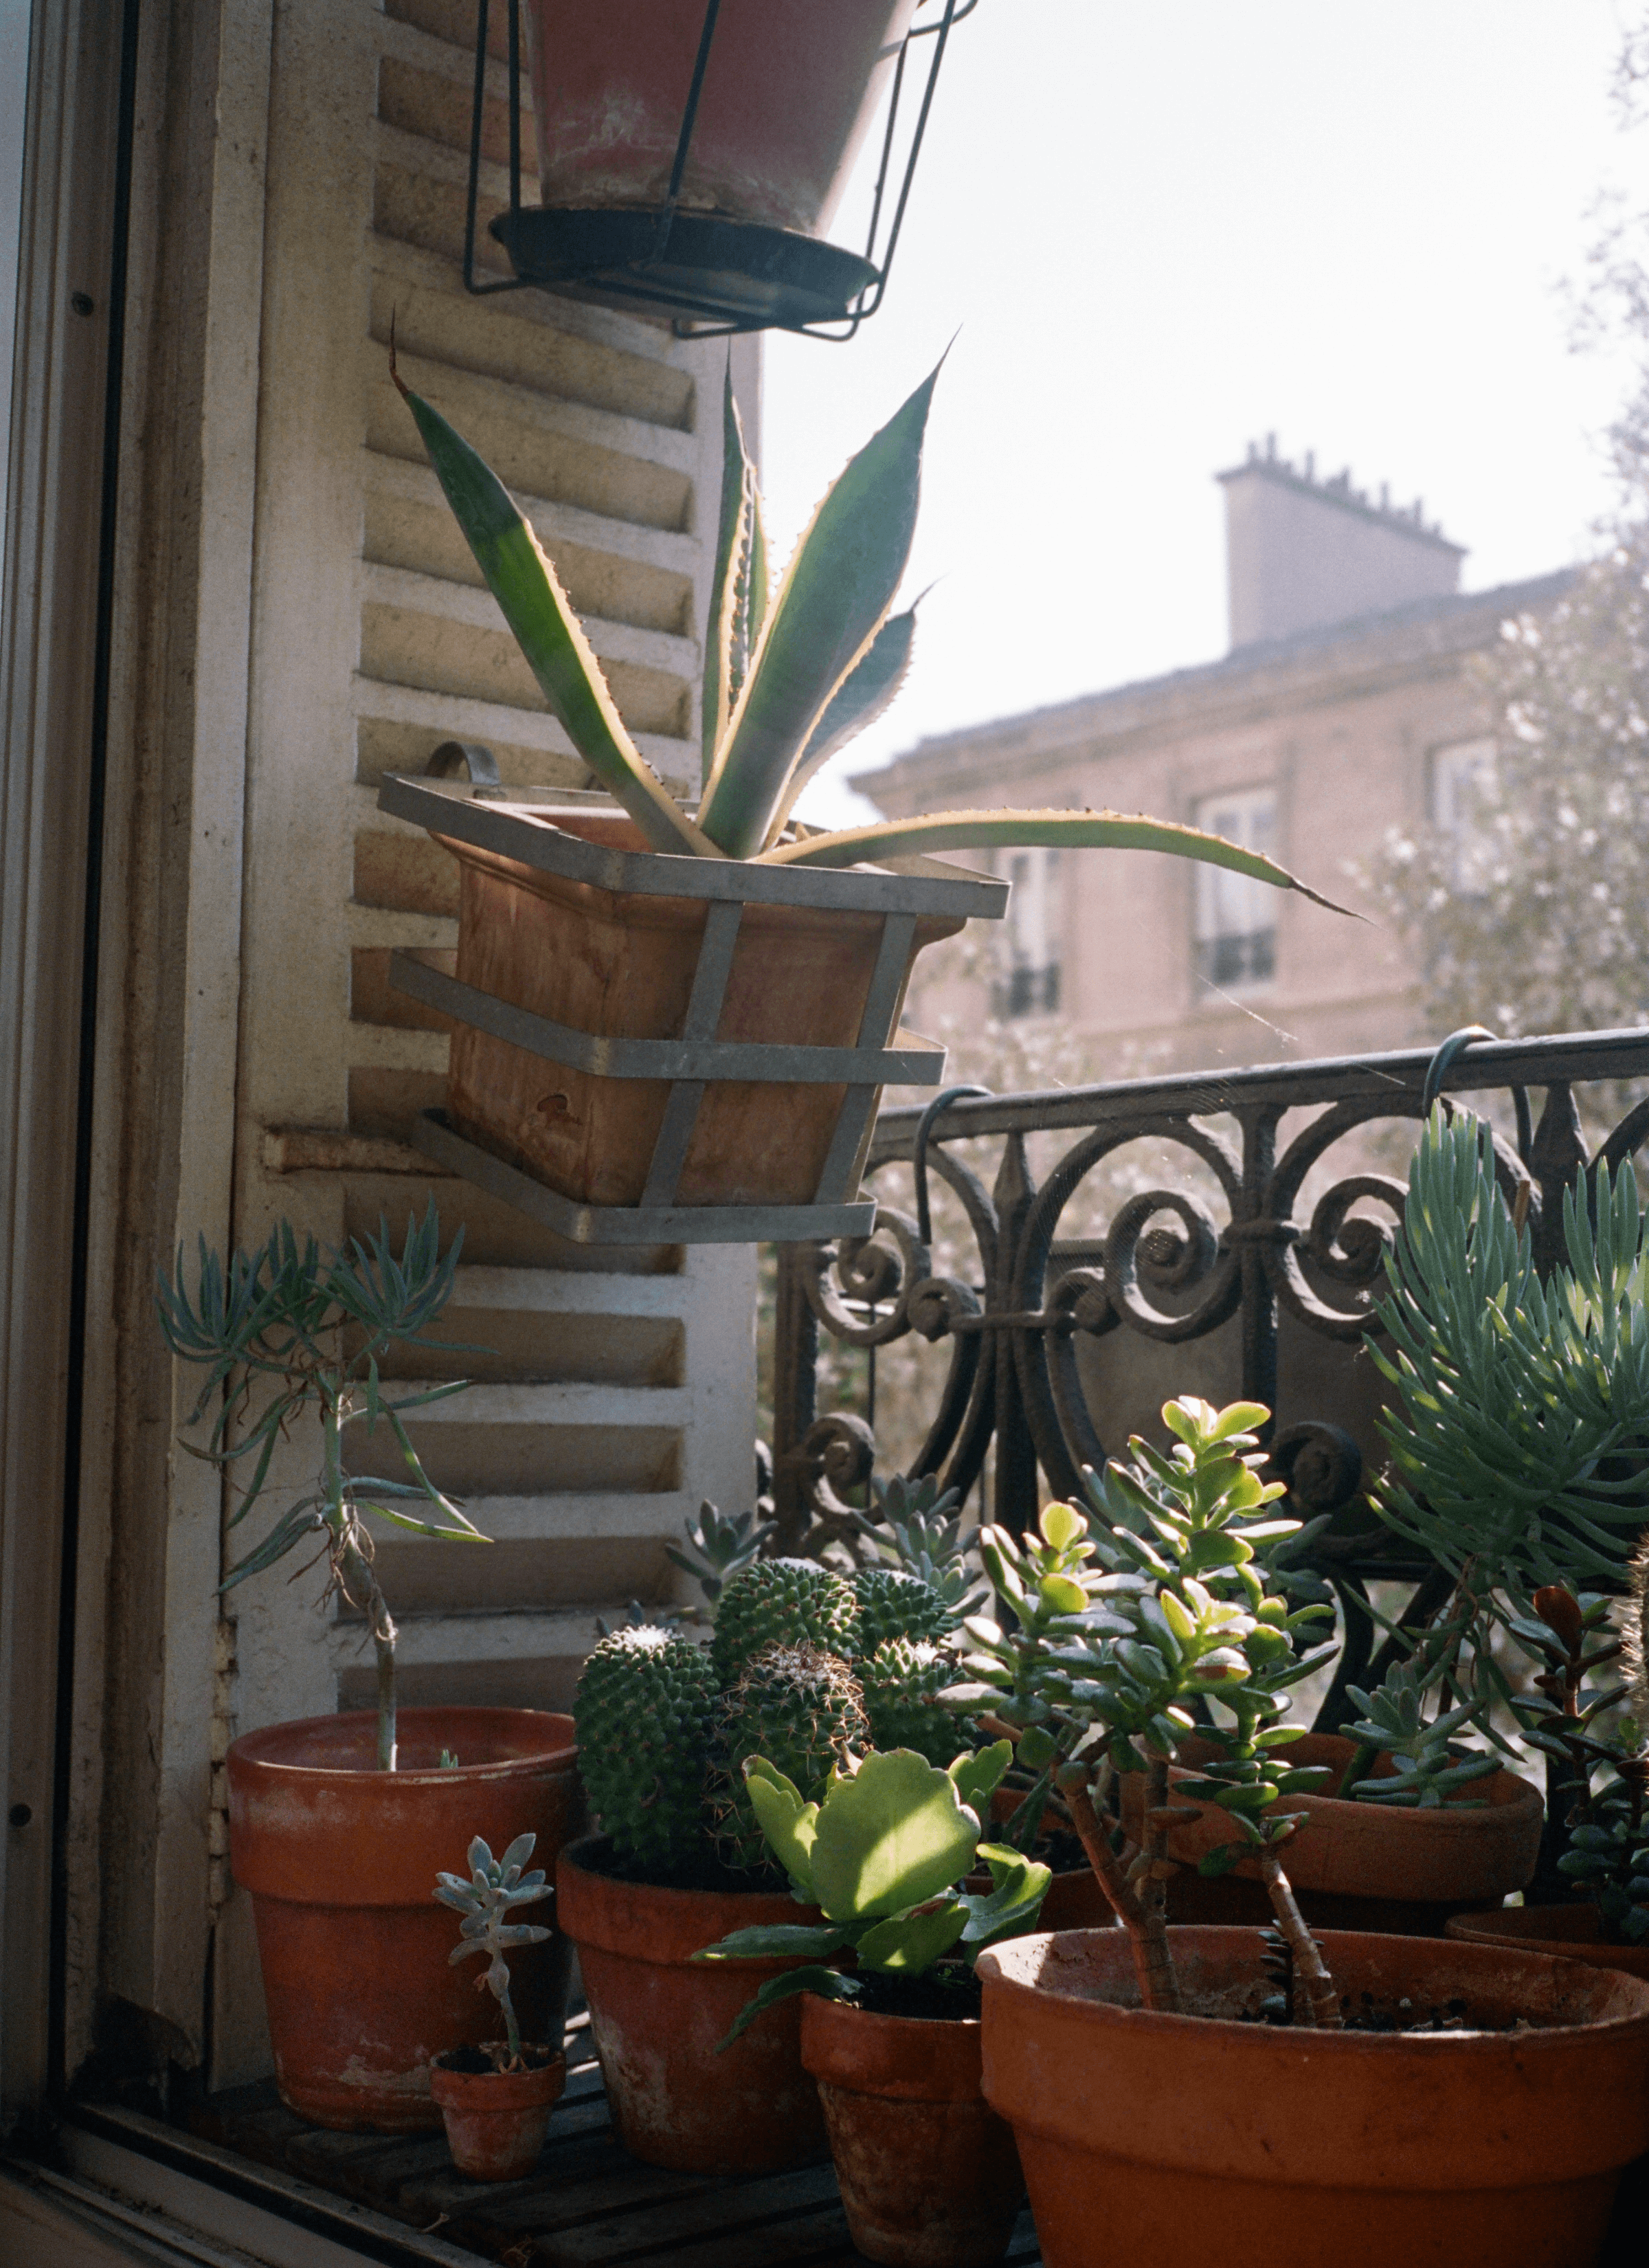 A collection of terracotta potted plants is on the window shelf under the sunlight while a few pots are on the wall shelf.